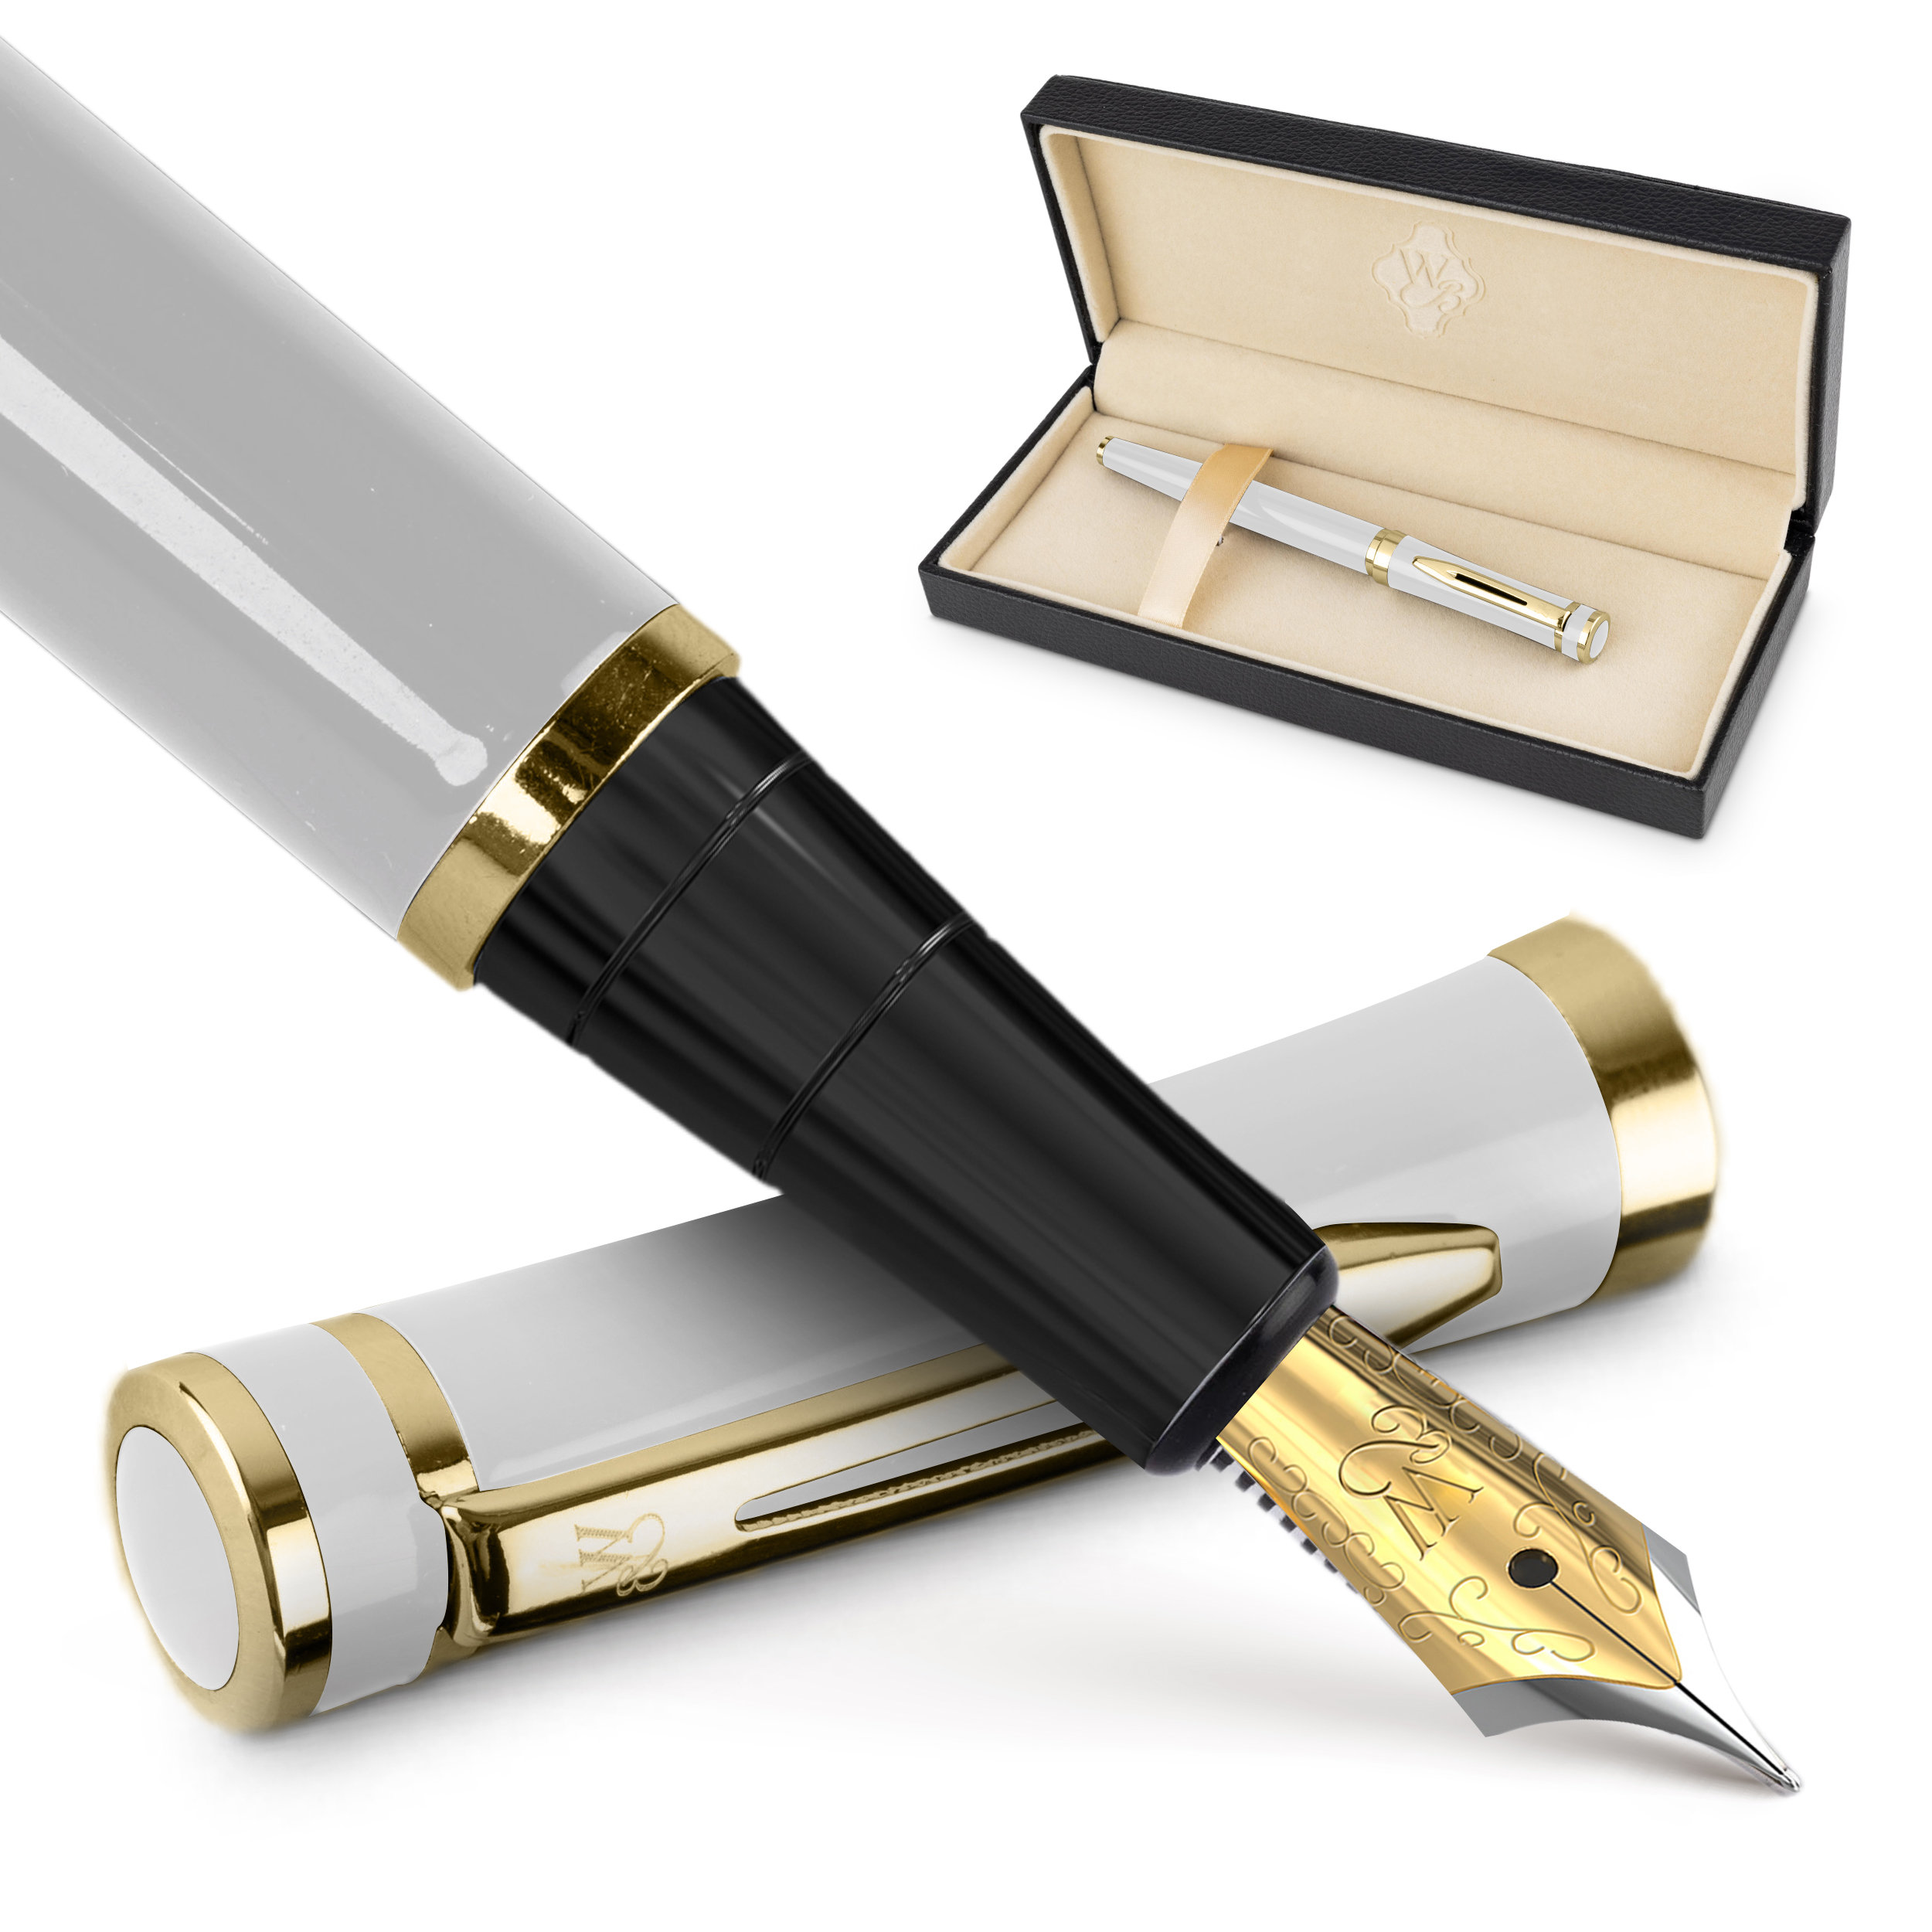 Video-Review: Montblanc M - Scrively - note taking & writing